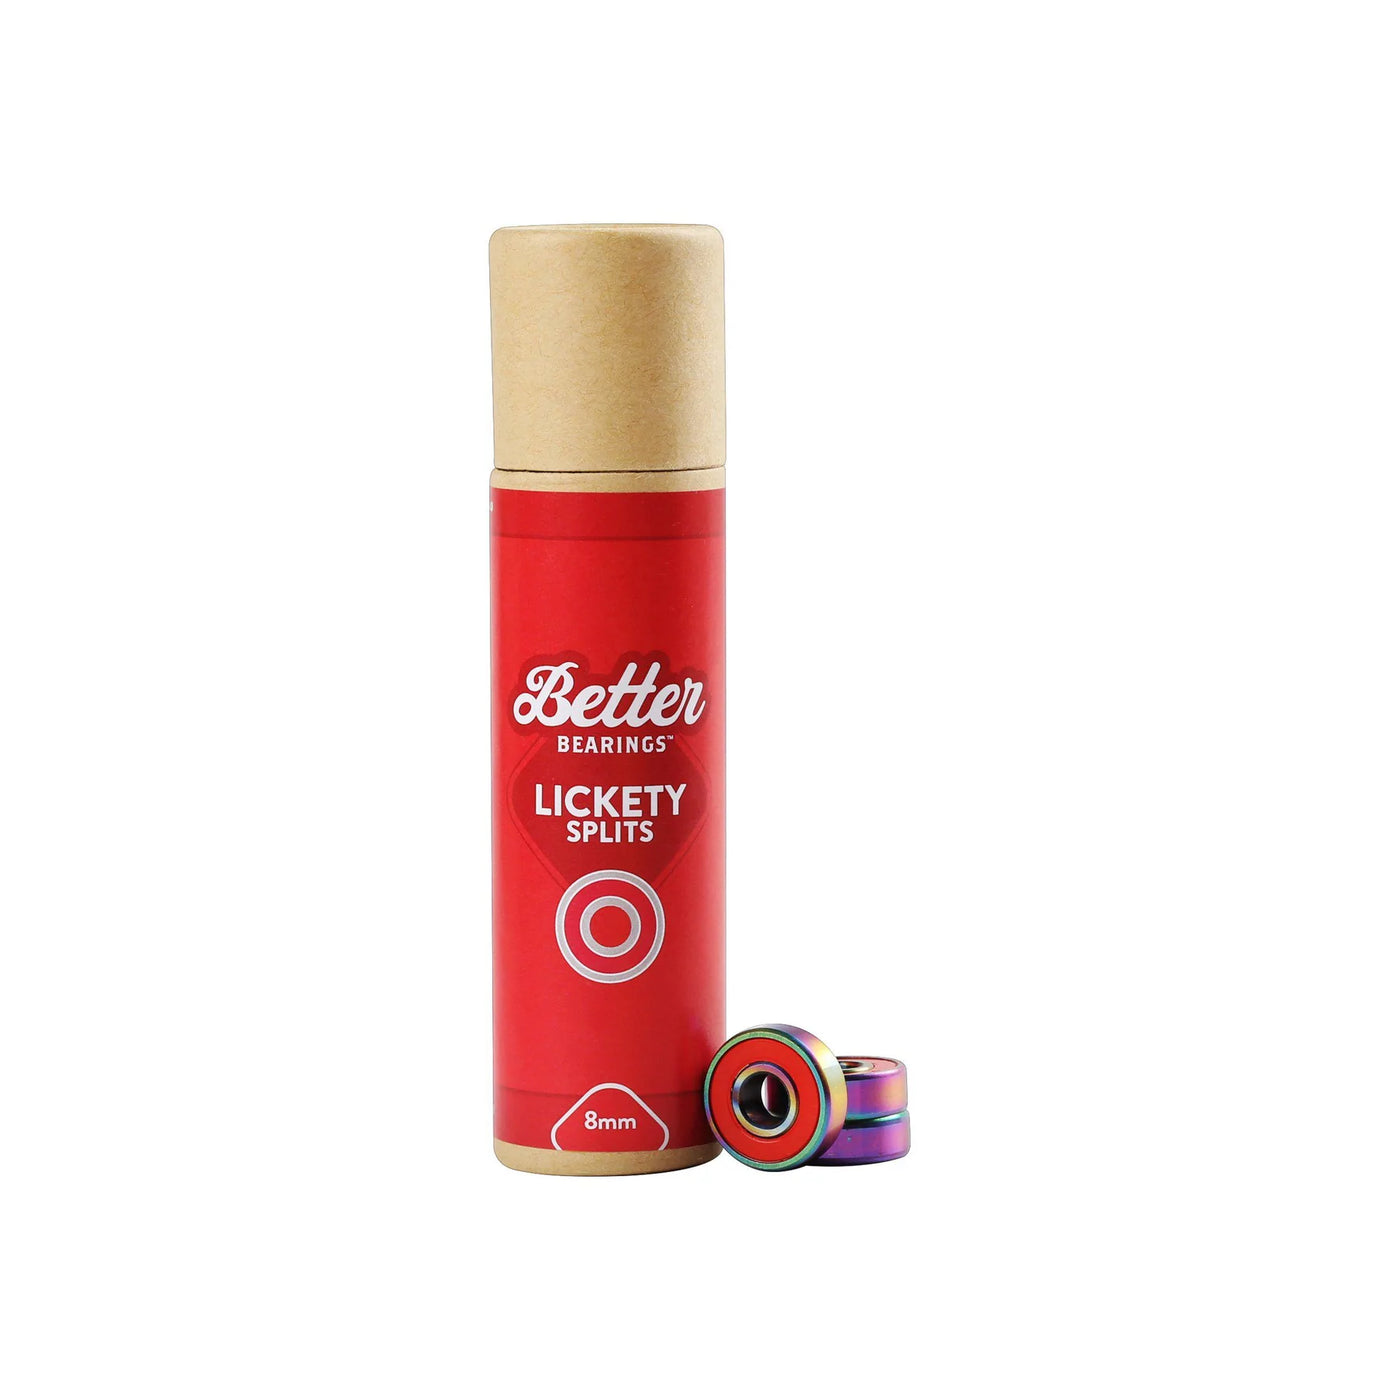 Better Bearings Lickety Splits 8mm - Red Set of 16